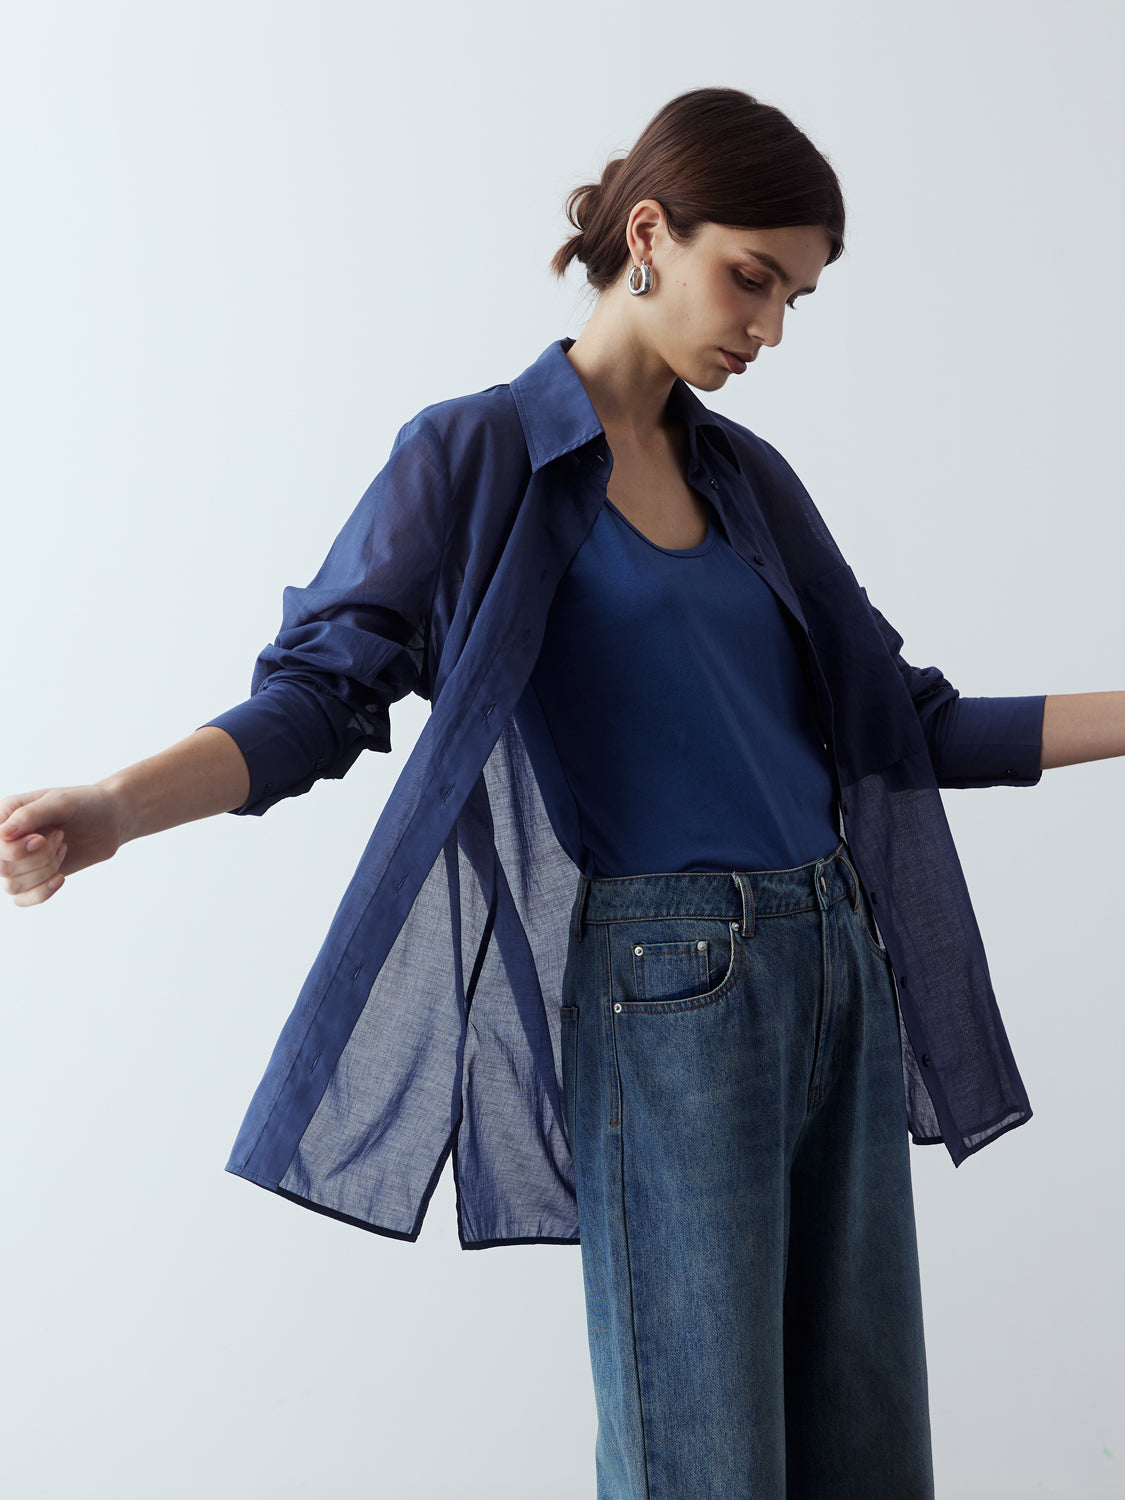 Model is wearing the Sheer Long Sleeve Shirt in Dark Blue, which comes with a straight hem, front placket with buttons and a left breast pocket. Worn with the Jersey Tank in Dark Blue, the Denim Straight Cut Jeans and metallic silver heels.